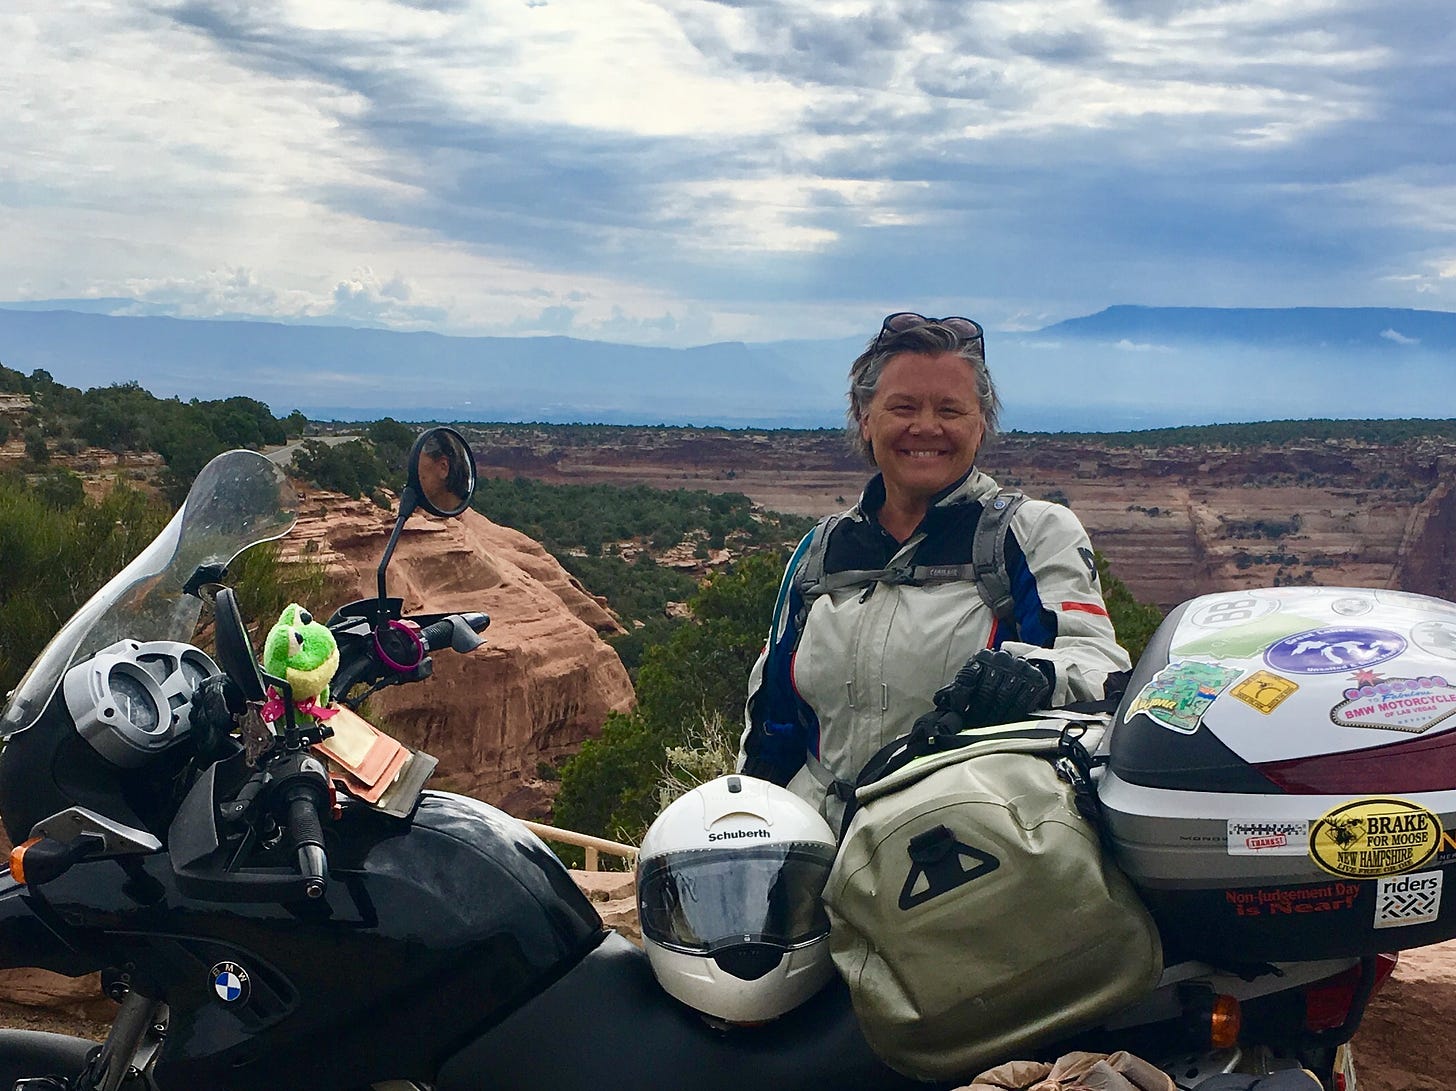 Tamela and her motorcycle at Colorado National Monument, 2017